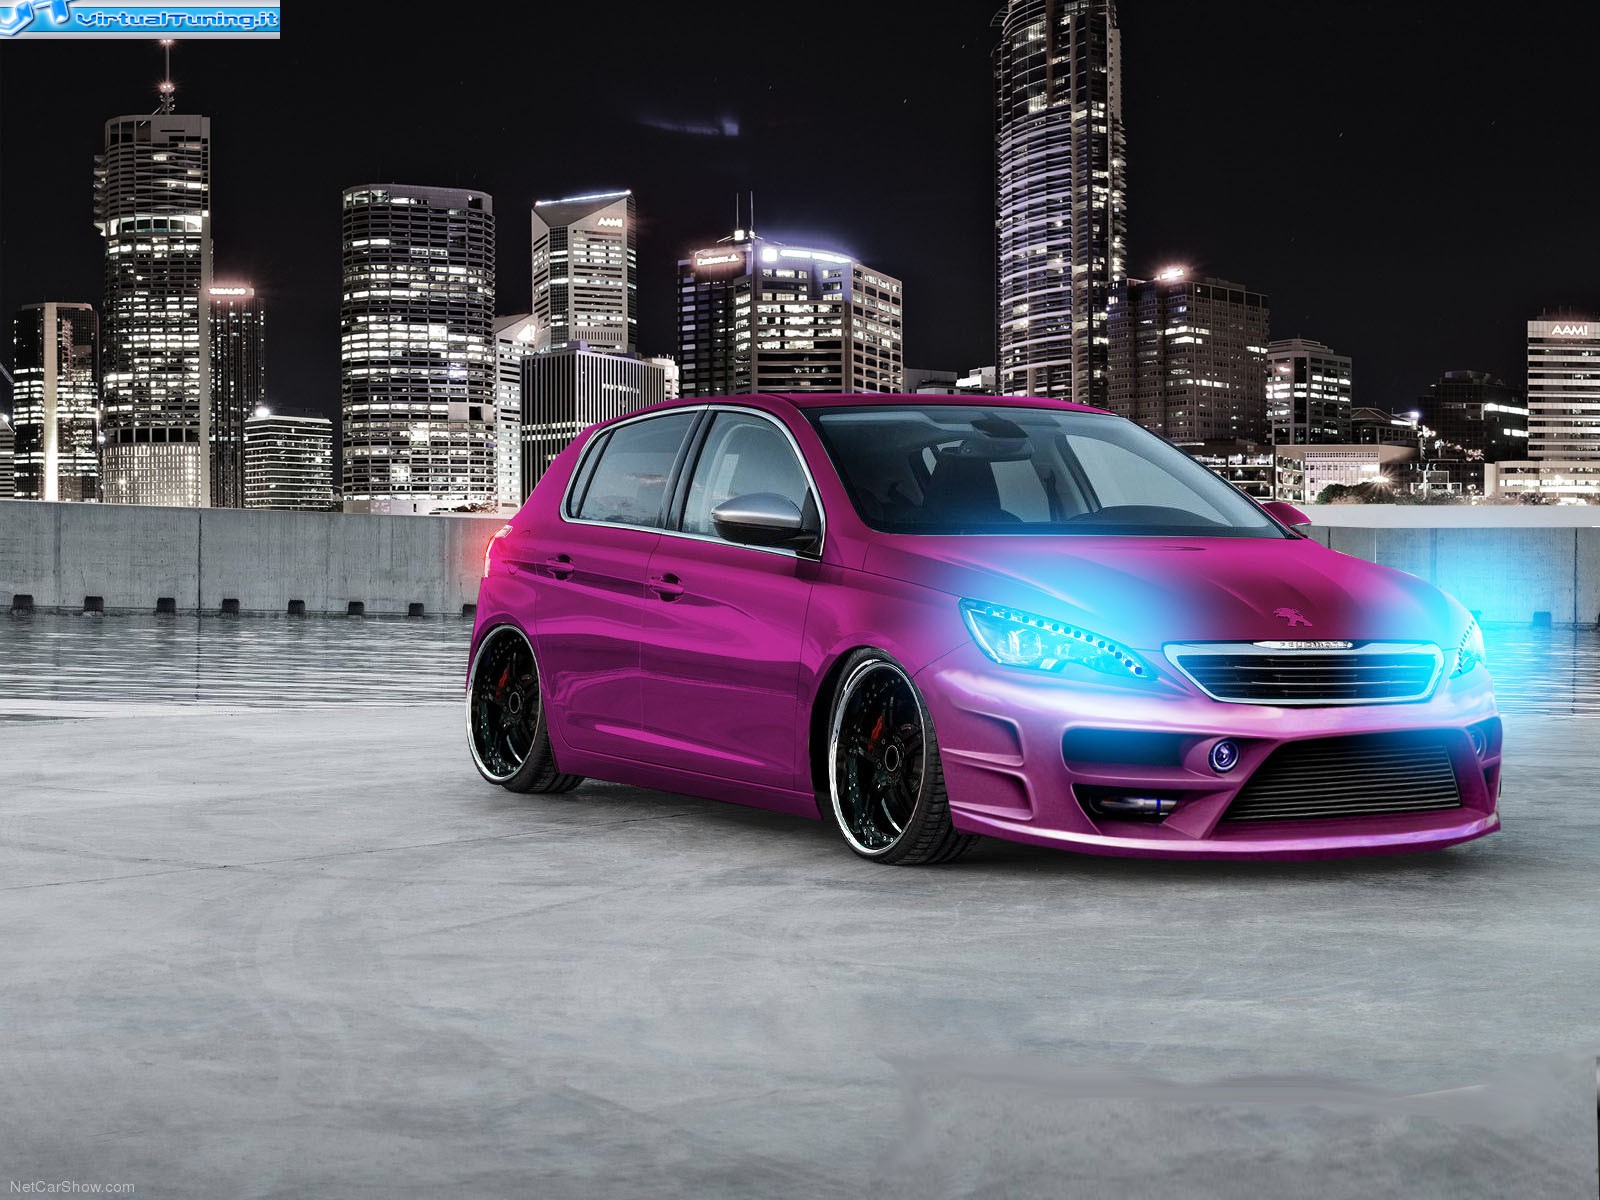 VirtualTuning PEUGEOT 308 by 